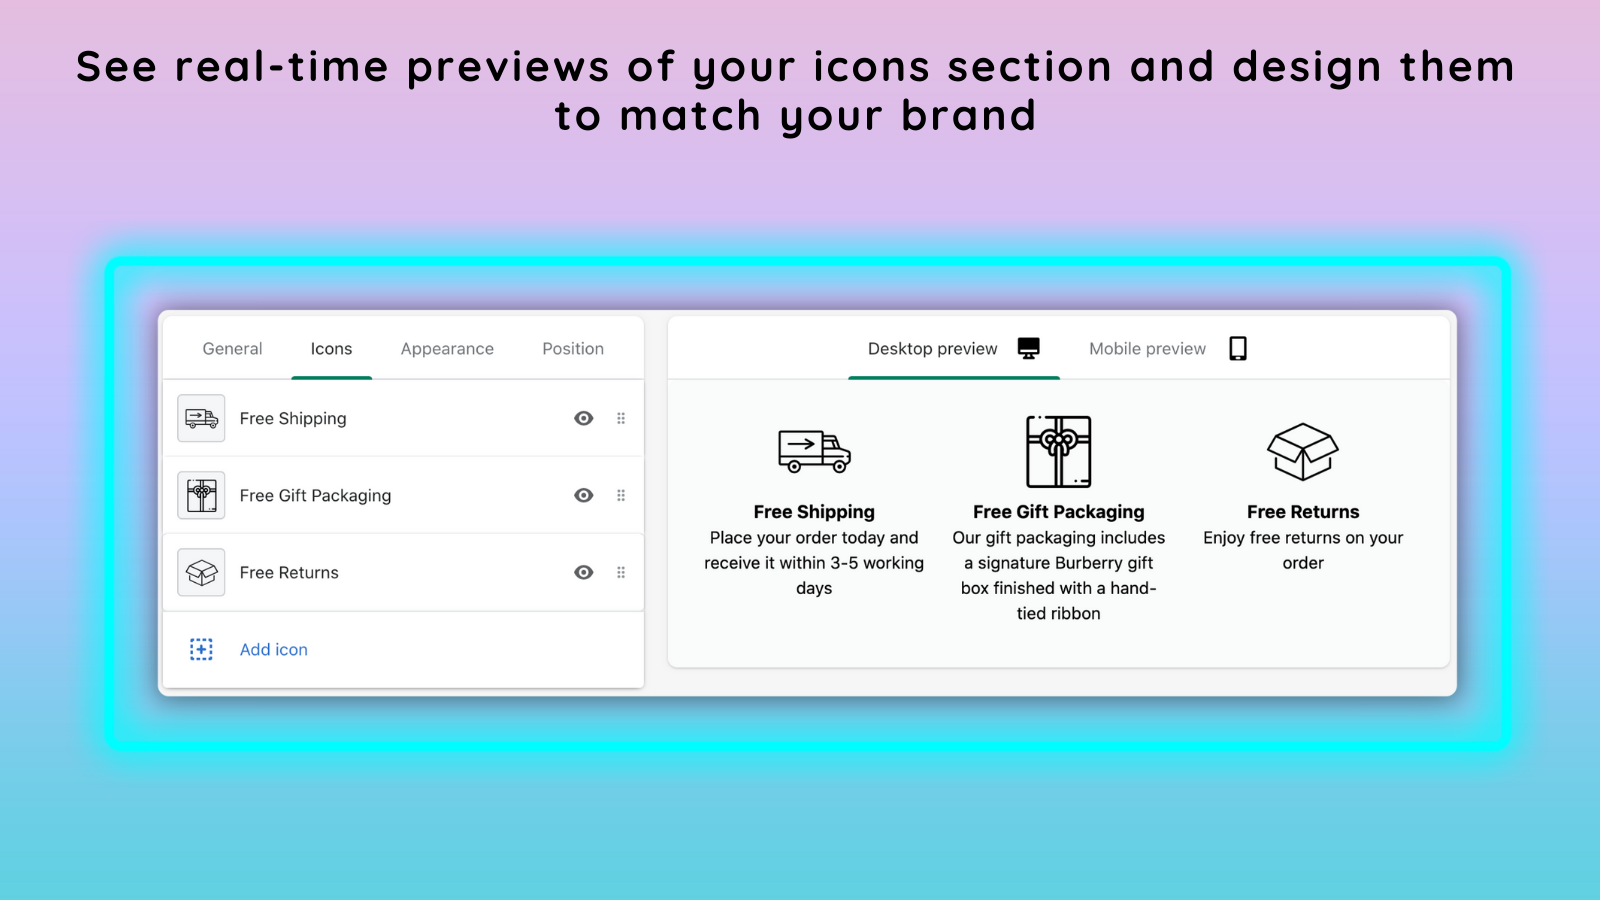 Real-time previews of your icons